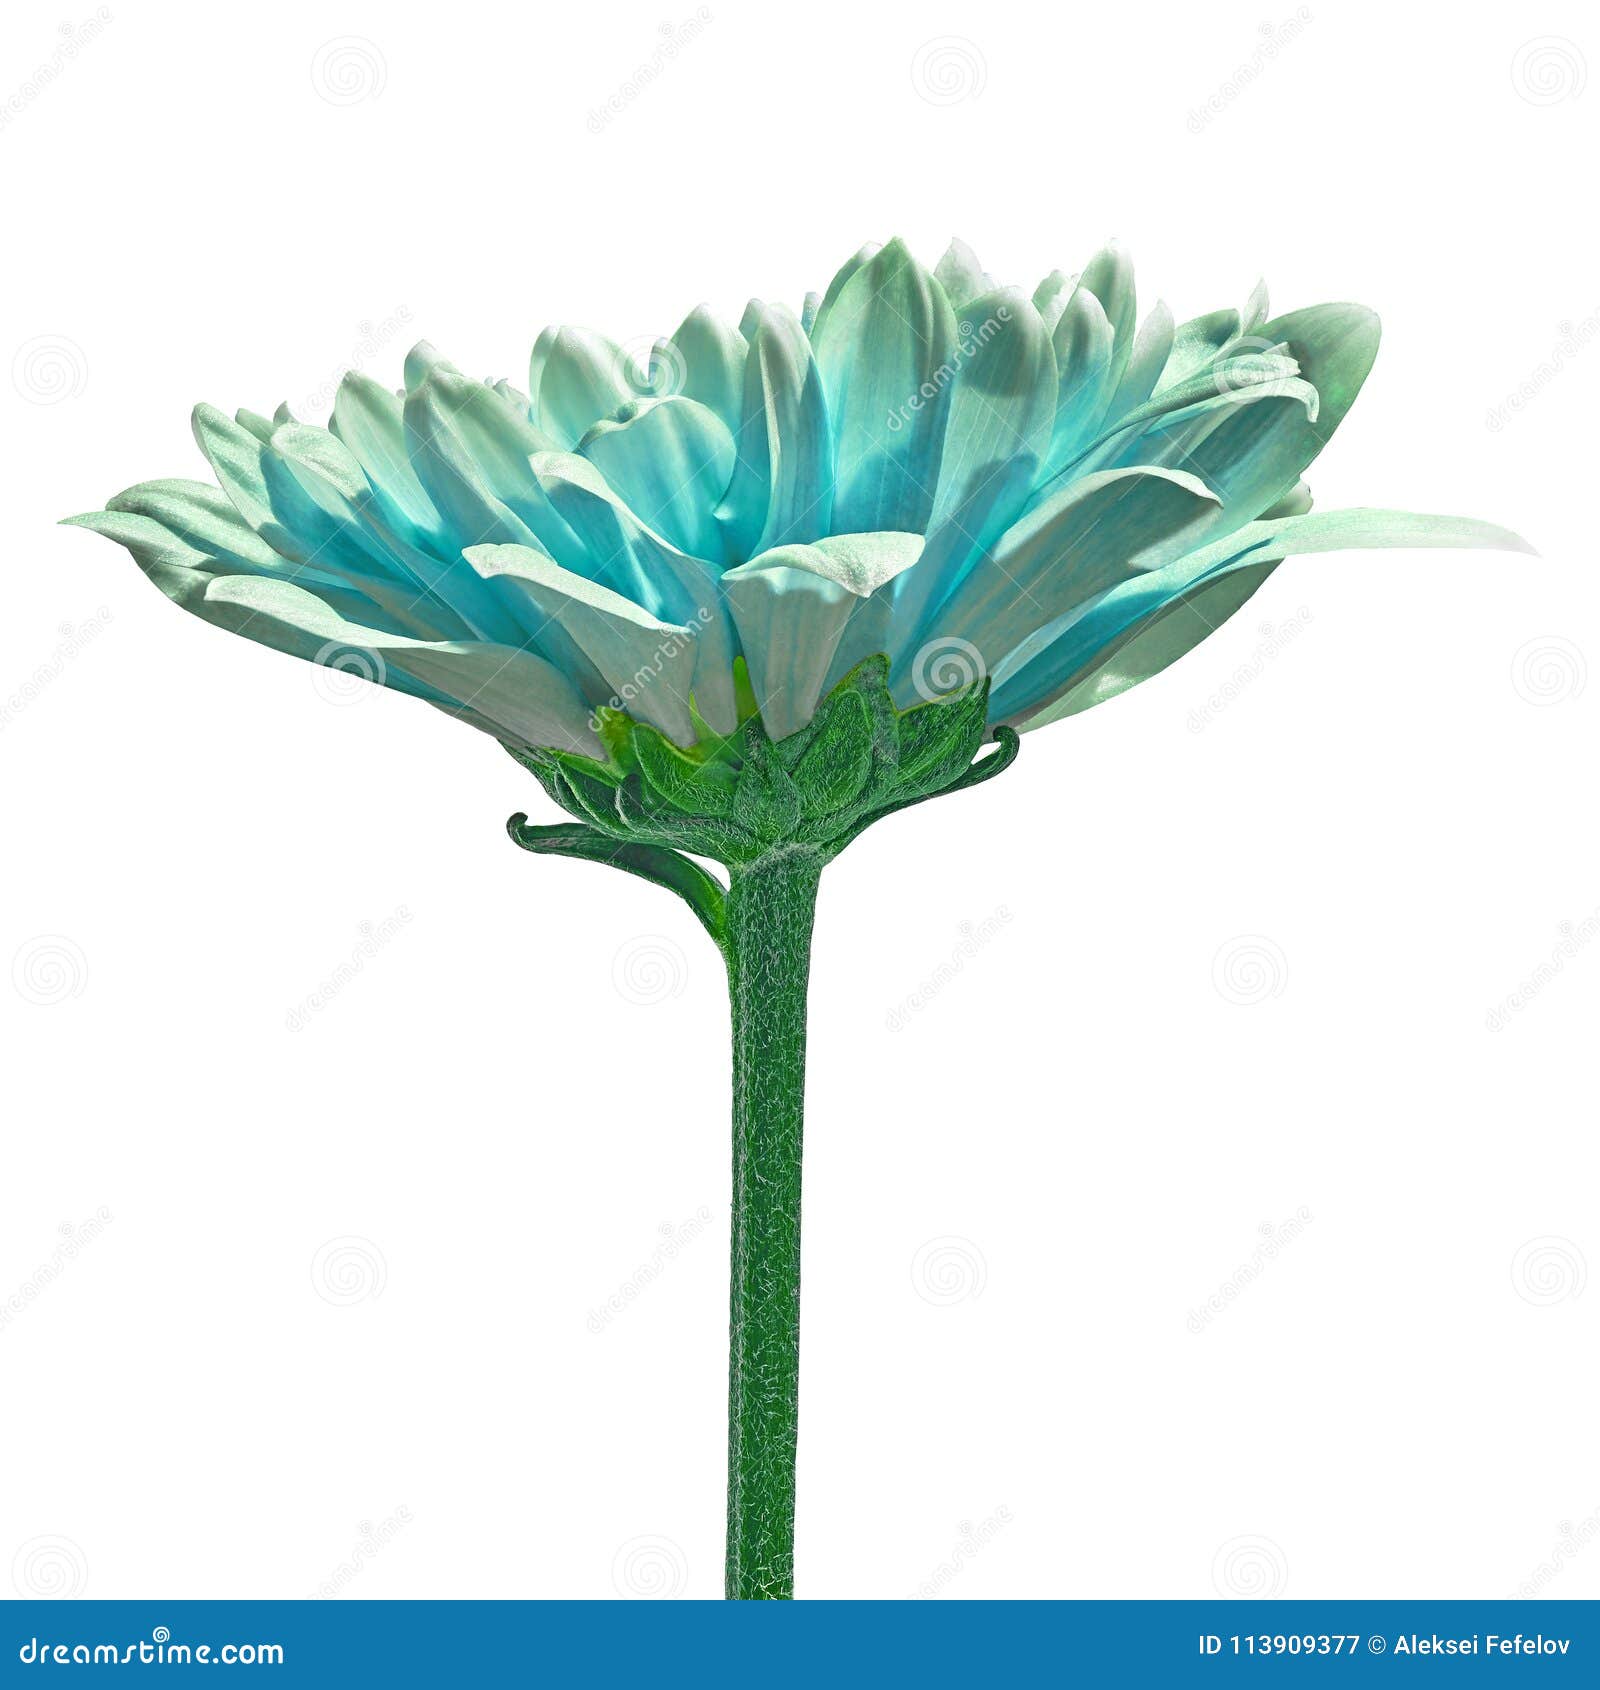 A Cyan Chrysanthemum Flower Isolated On A White Background. Close-up. Flower Bud On A Green Stem